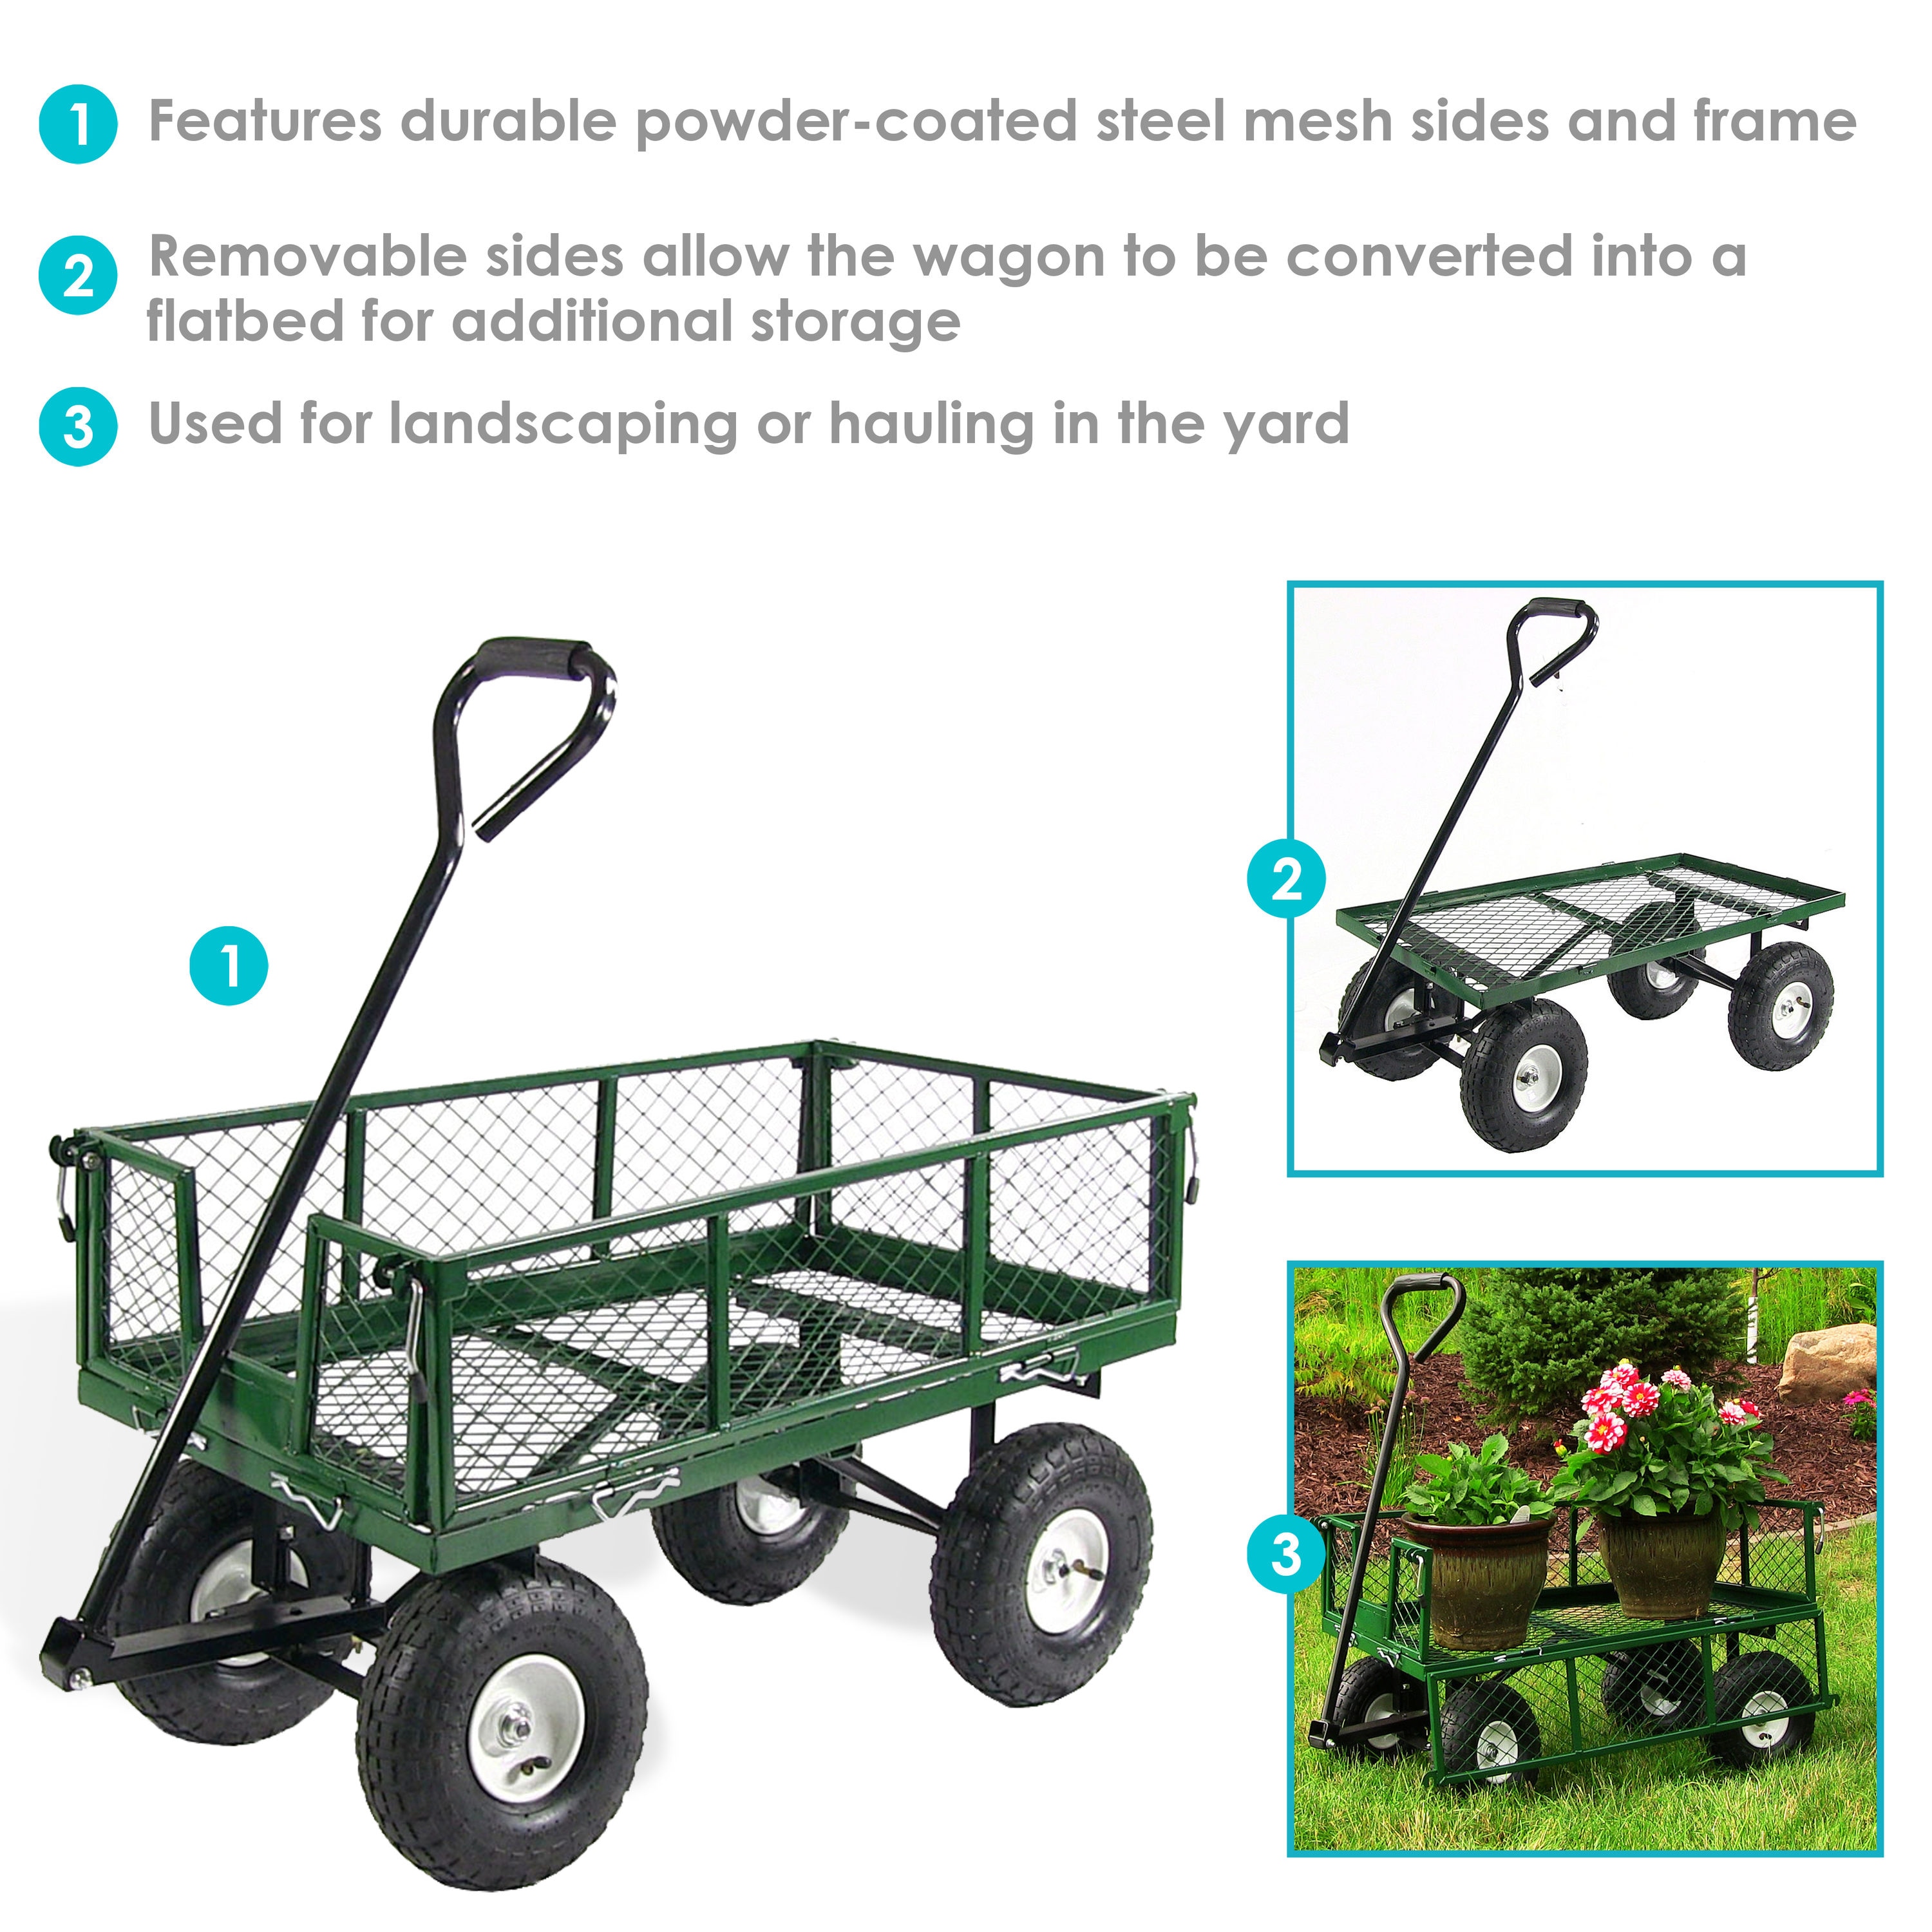 Sunnydaze Decor Green Steel Wagon Cart with Removable Sides, 400 lbs ...